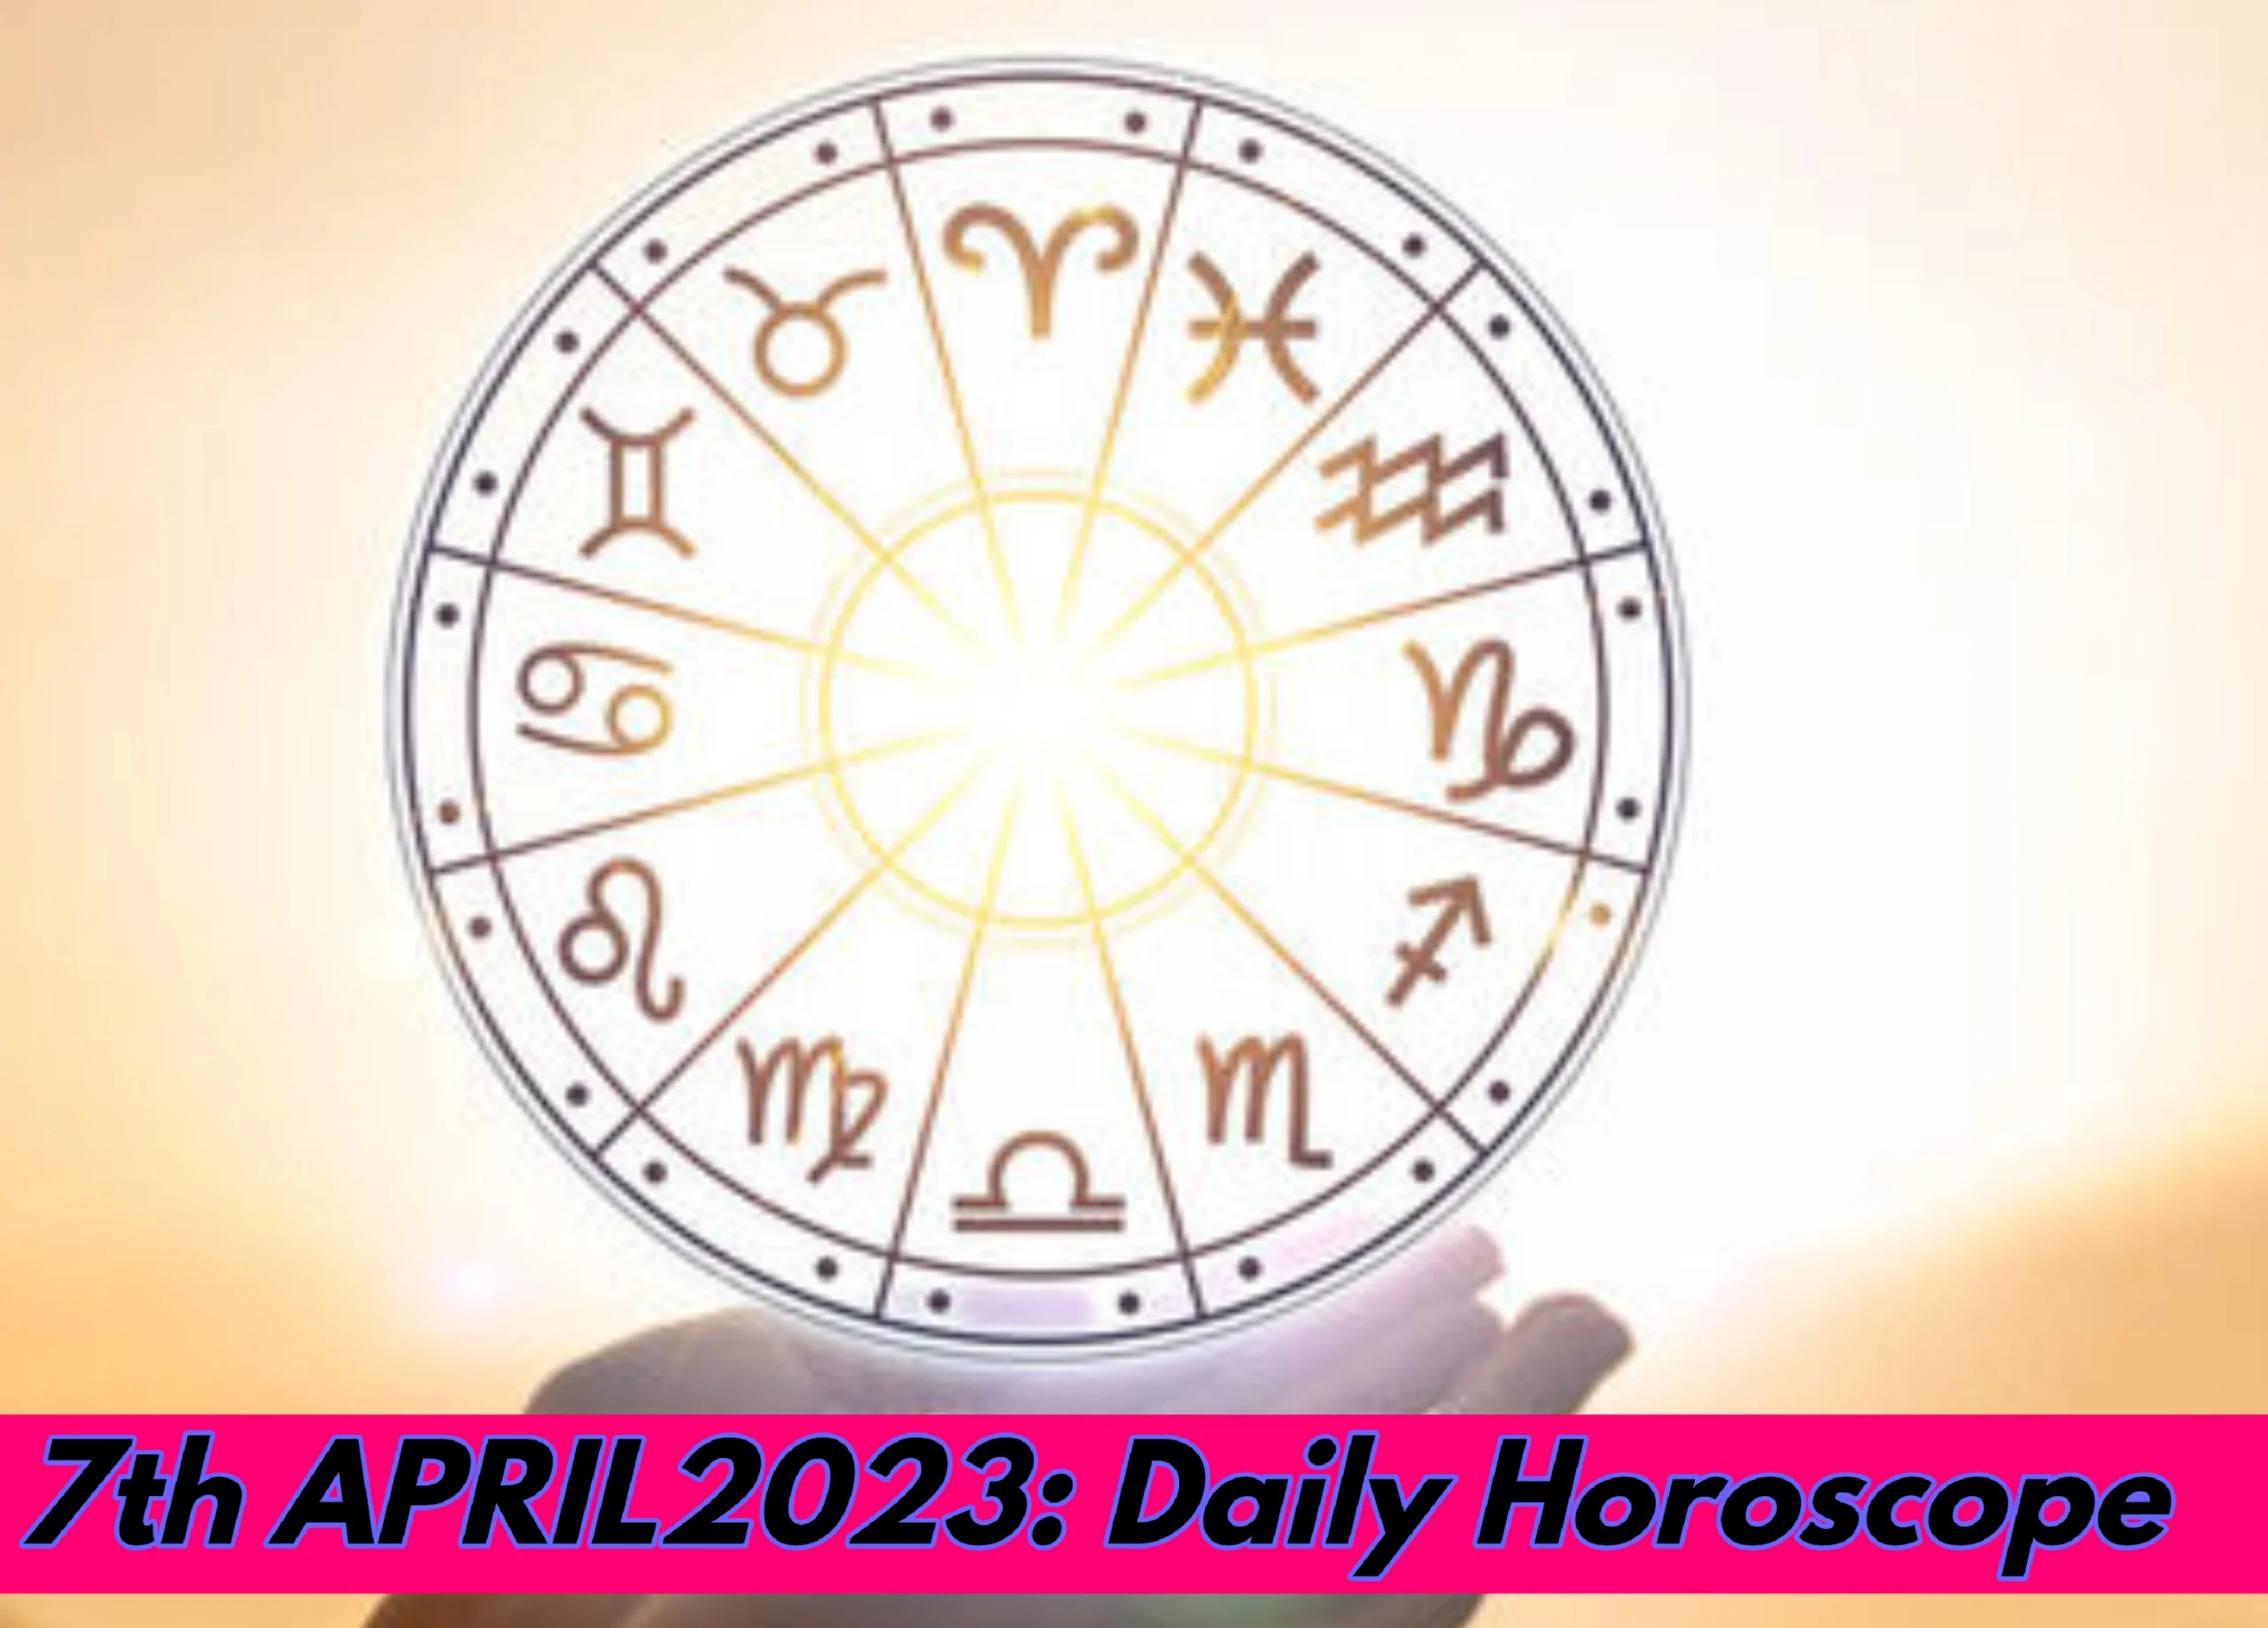 07 April 2023, Daily Horoscope: Gemini Will Experience Restlessness, Whereas Taurus To Focus On Their Careers, Check What Yours?